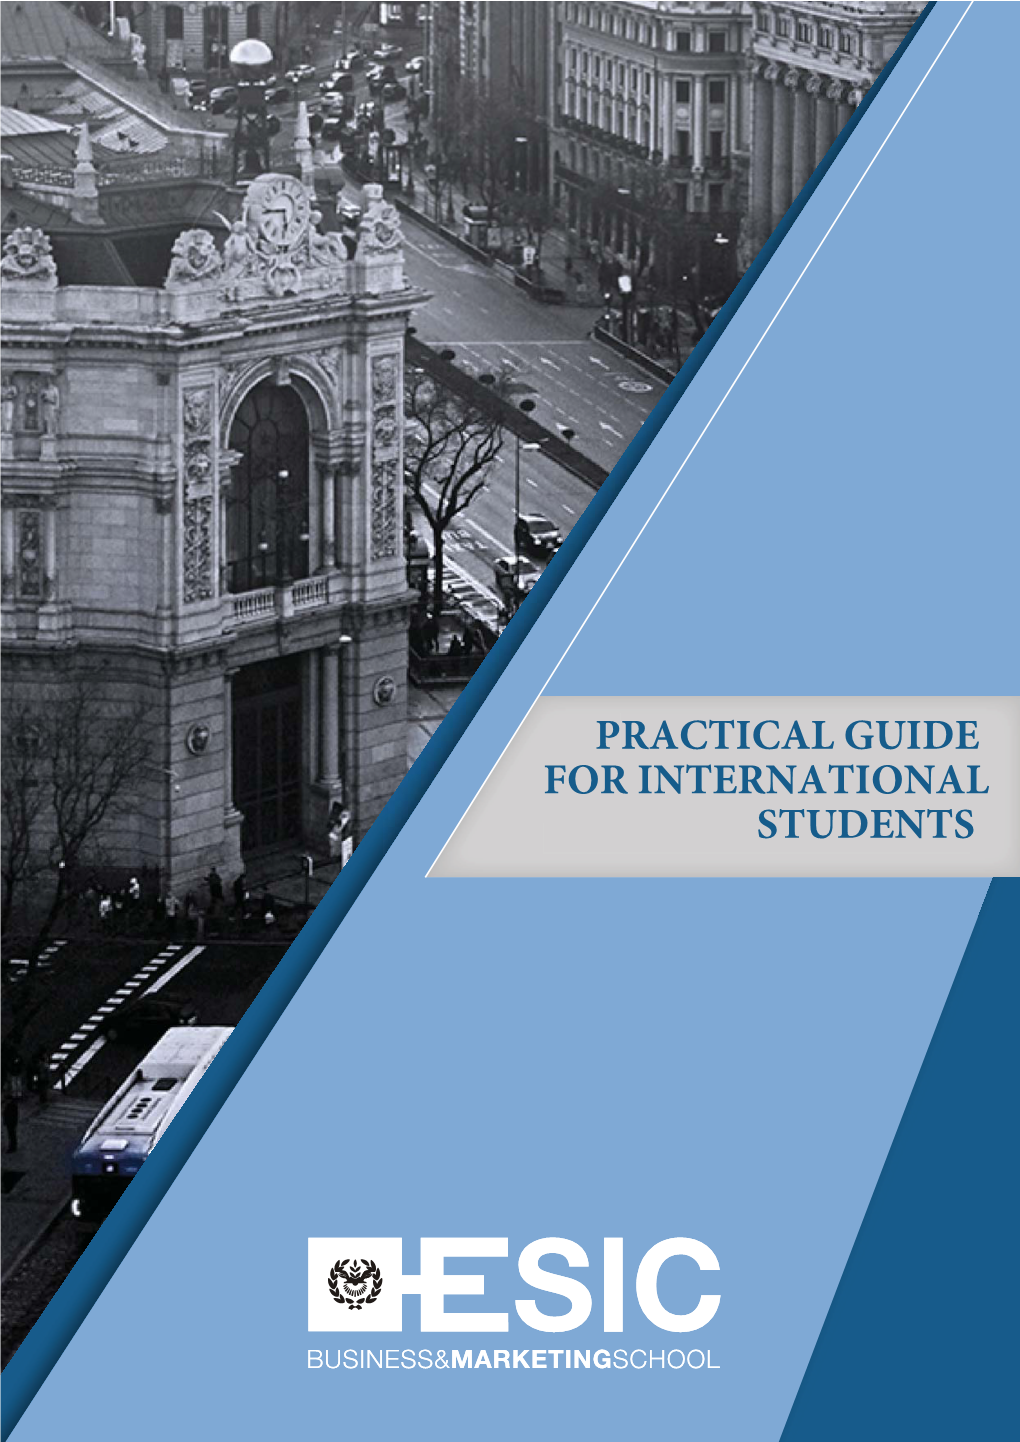 Pp Practical Guide for International Students